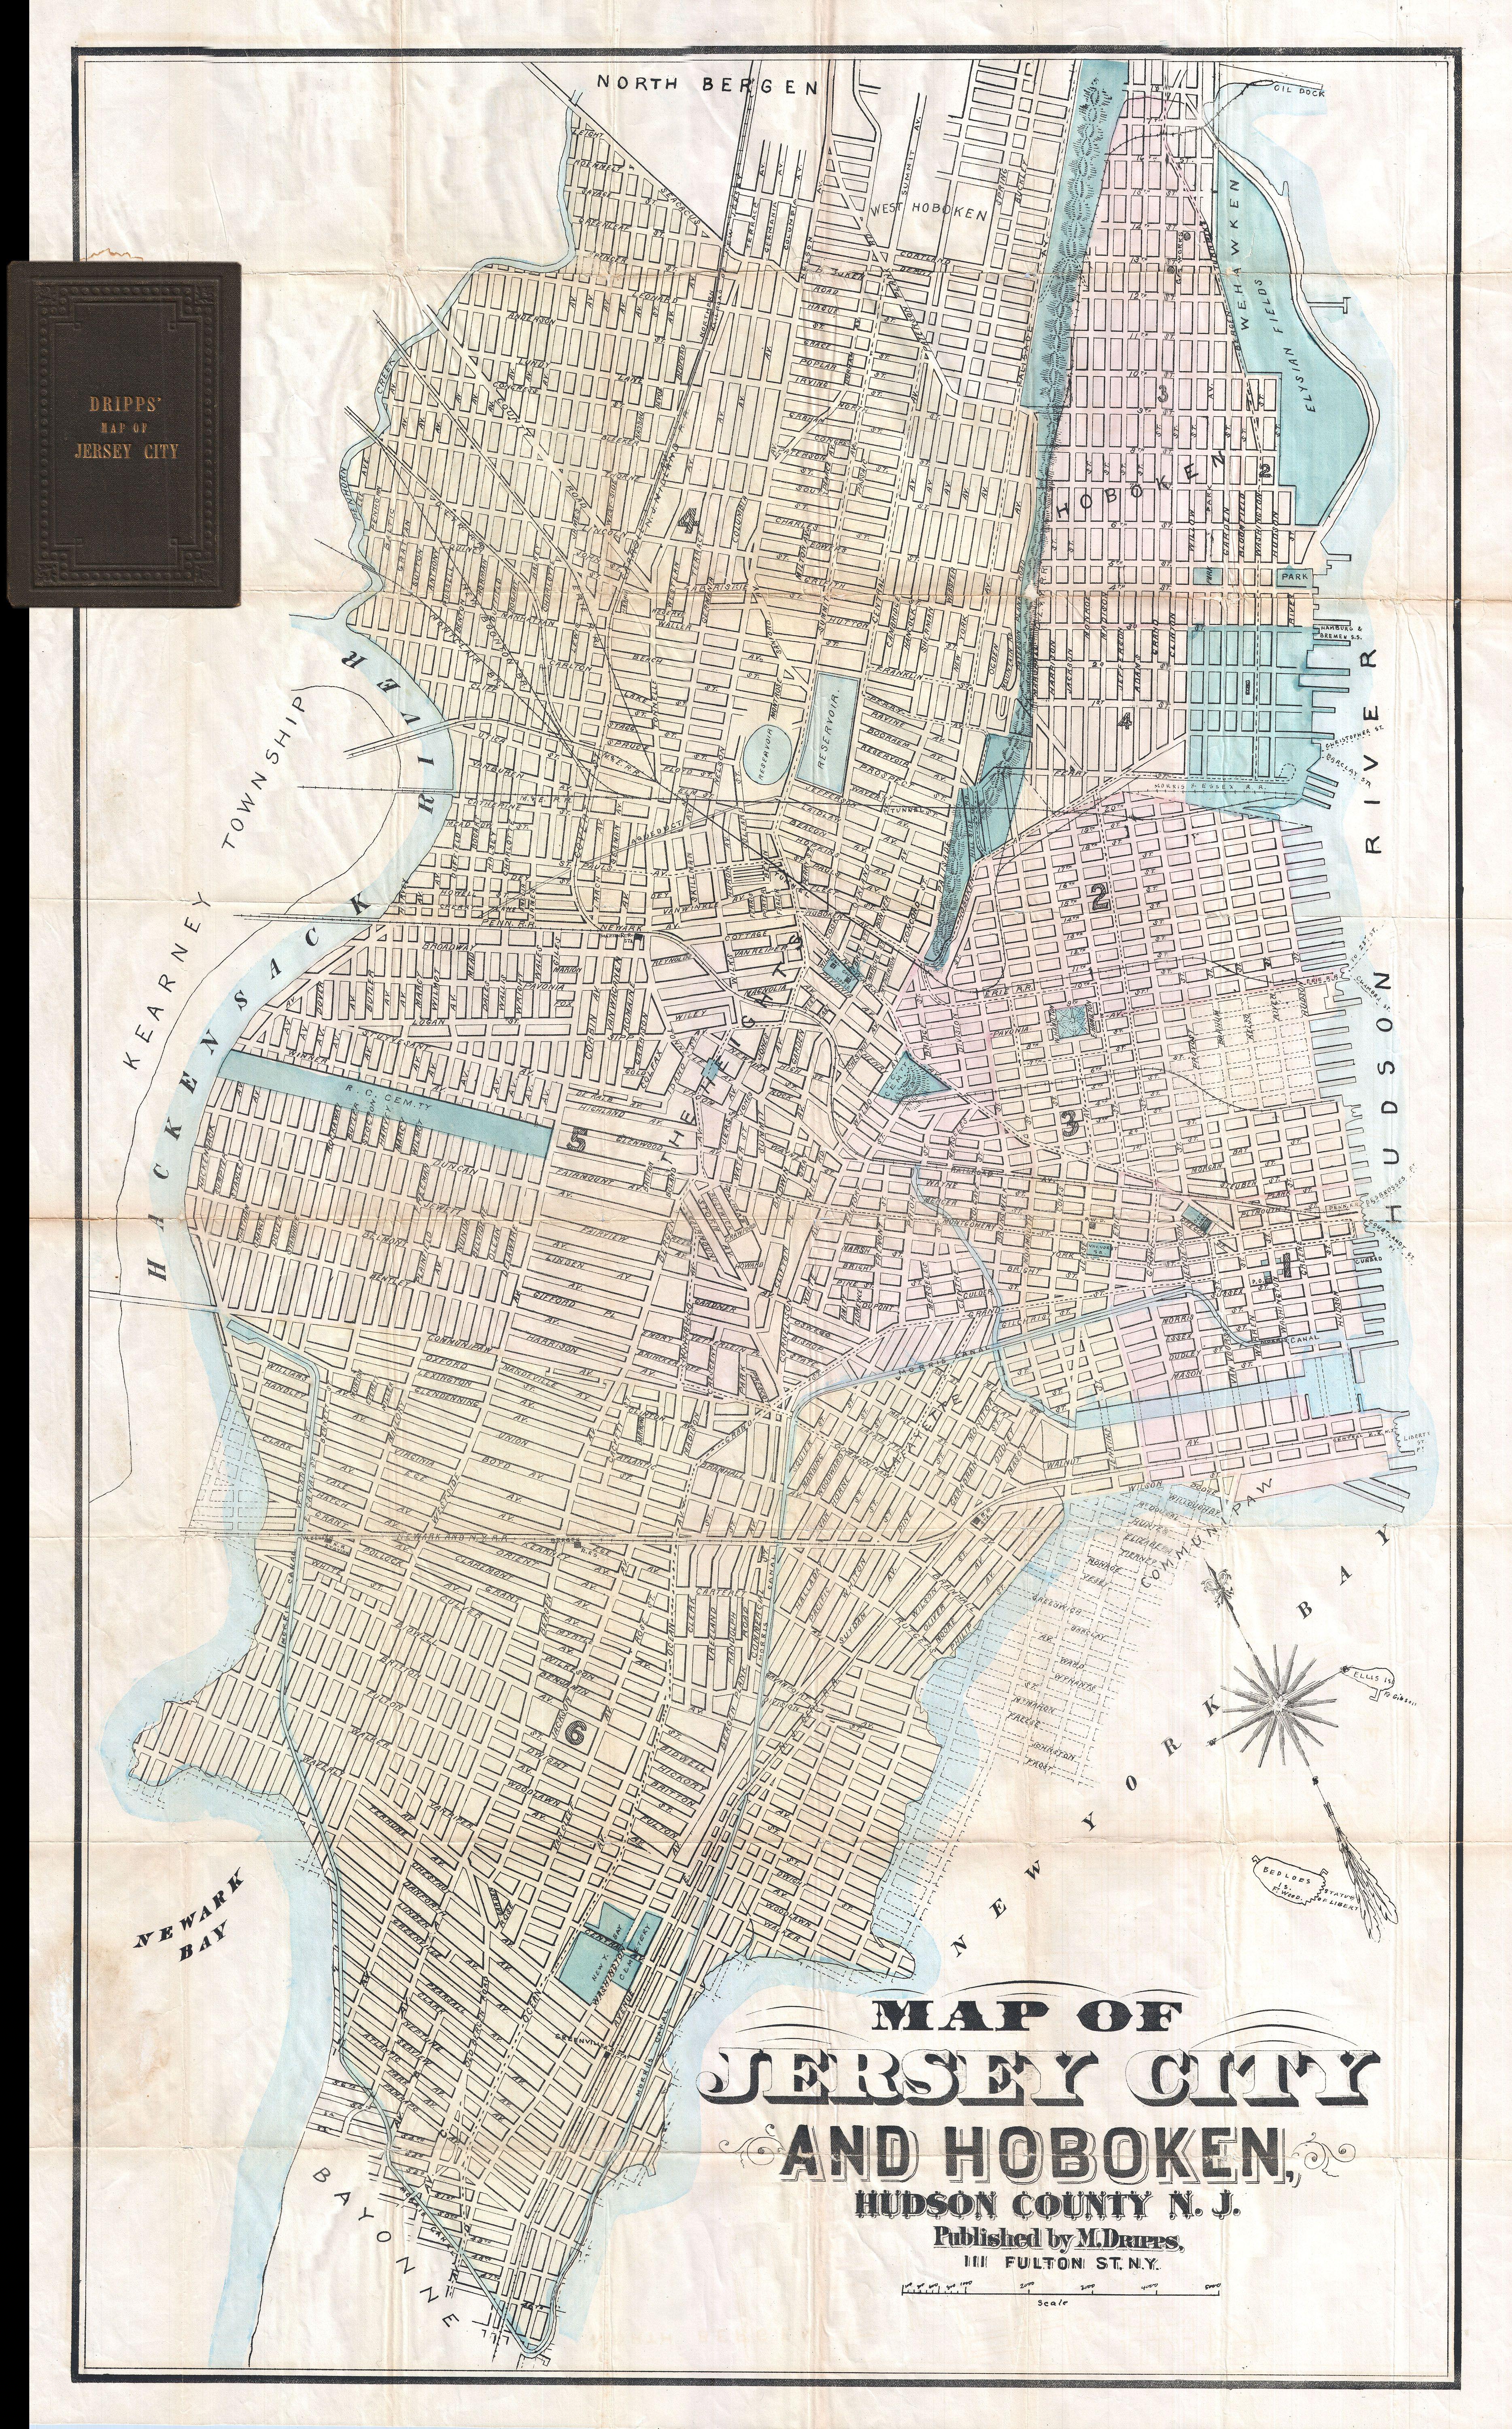 Map Of Jersey City Streets File:1886 Dripps Map of Hoboken and Jersey City, New Jersey 